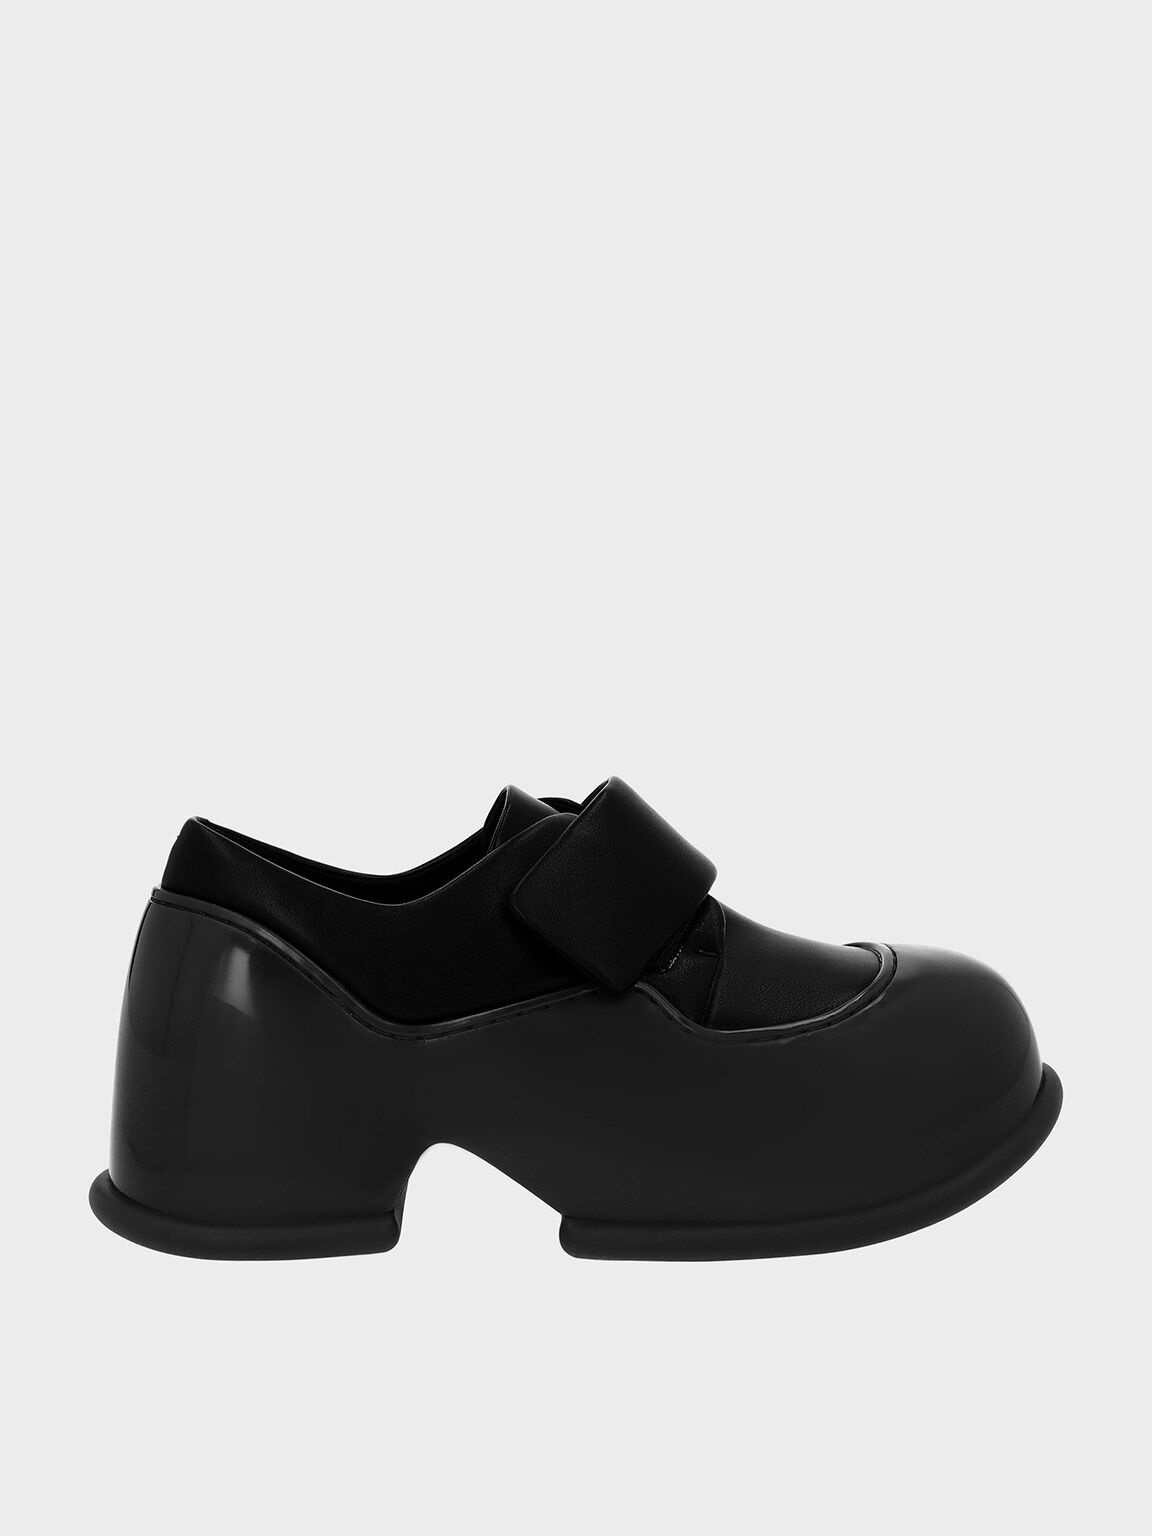 Black Pixie Patent Platform Loafers - CHARLES & KEITH MO